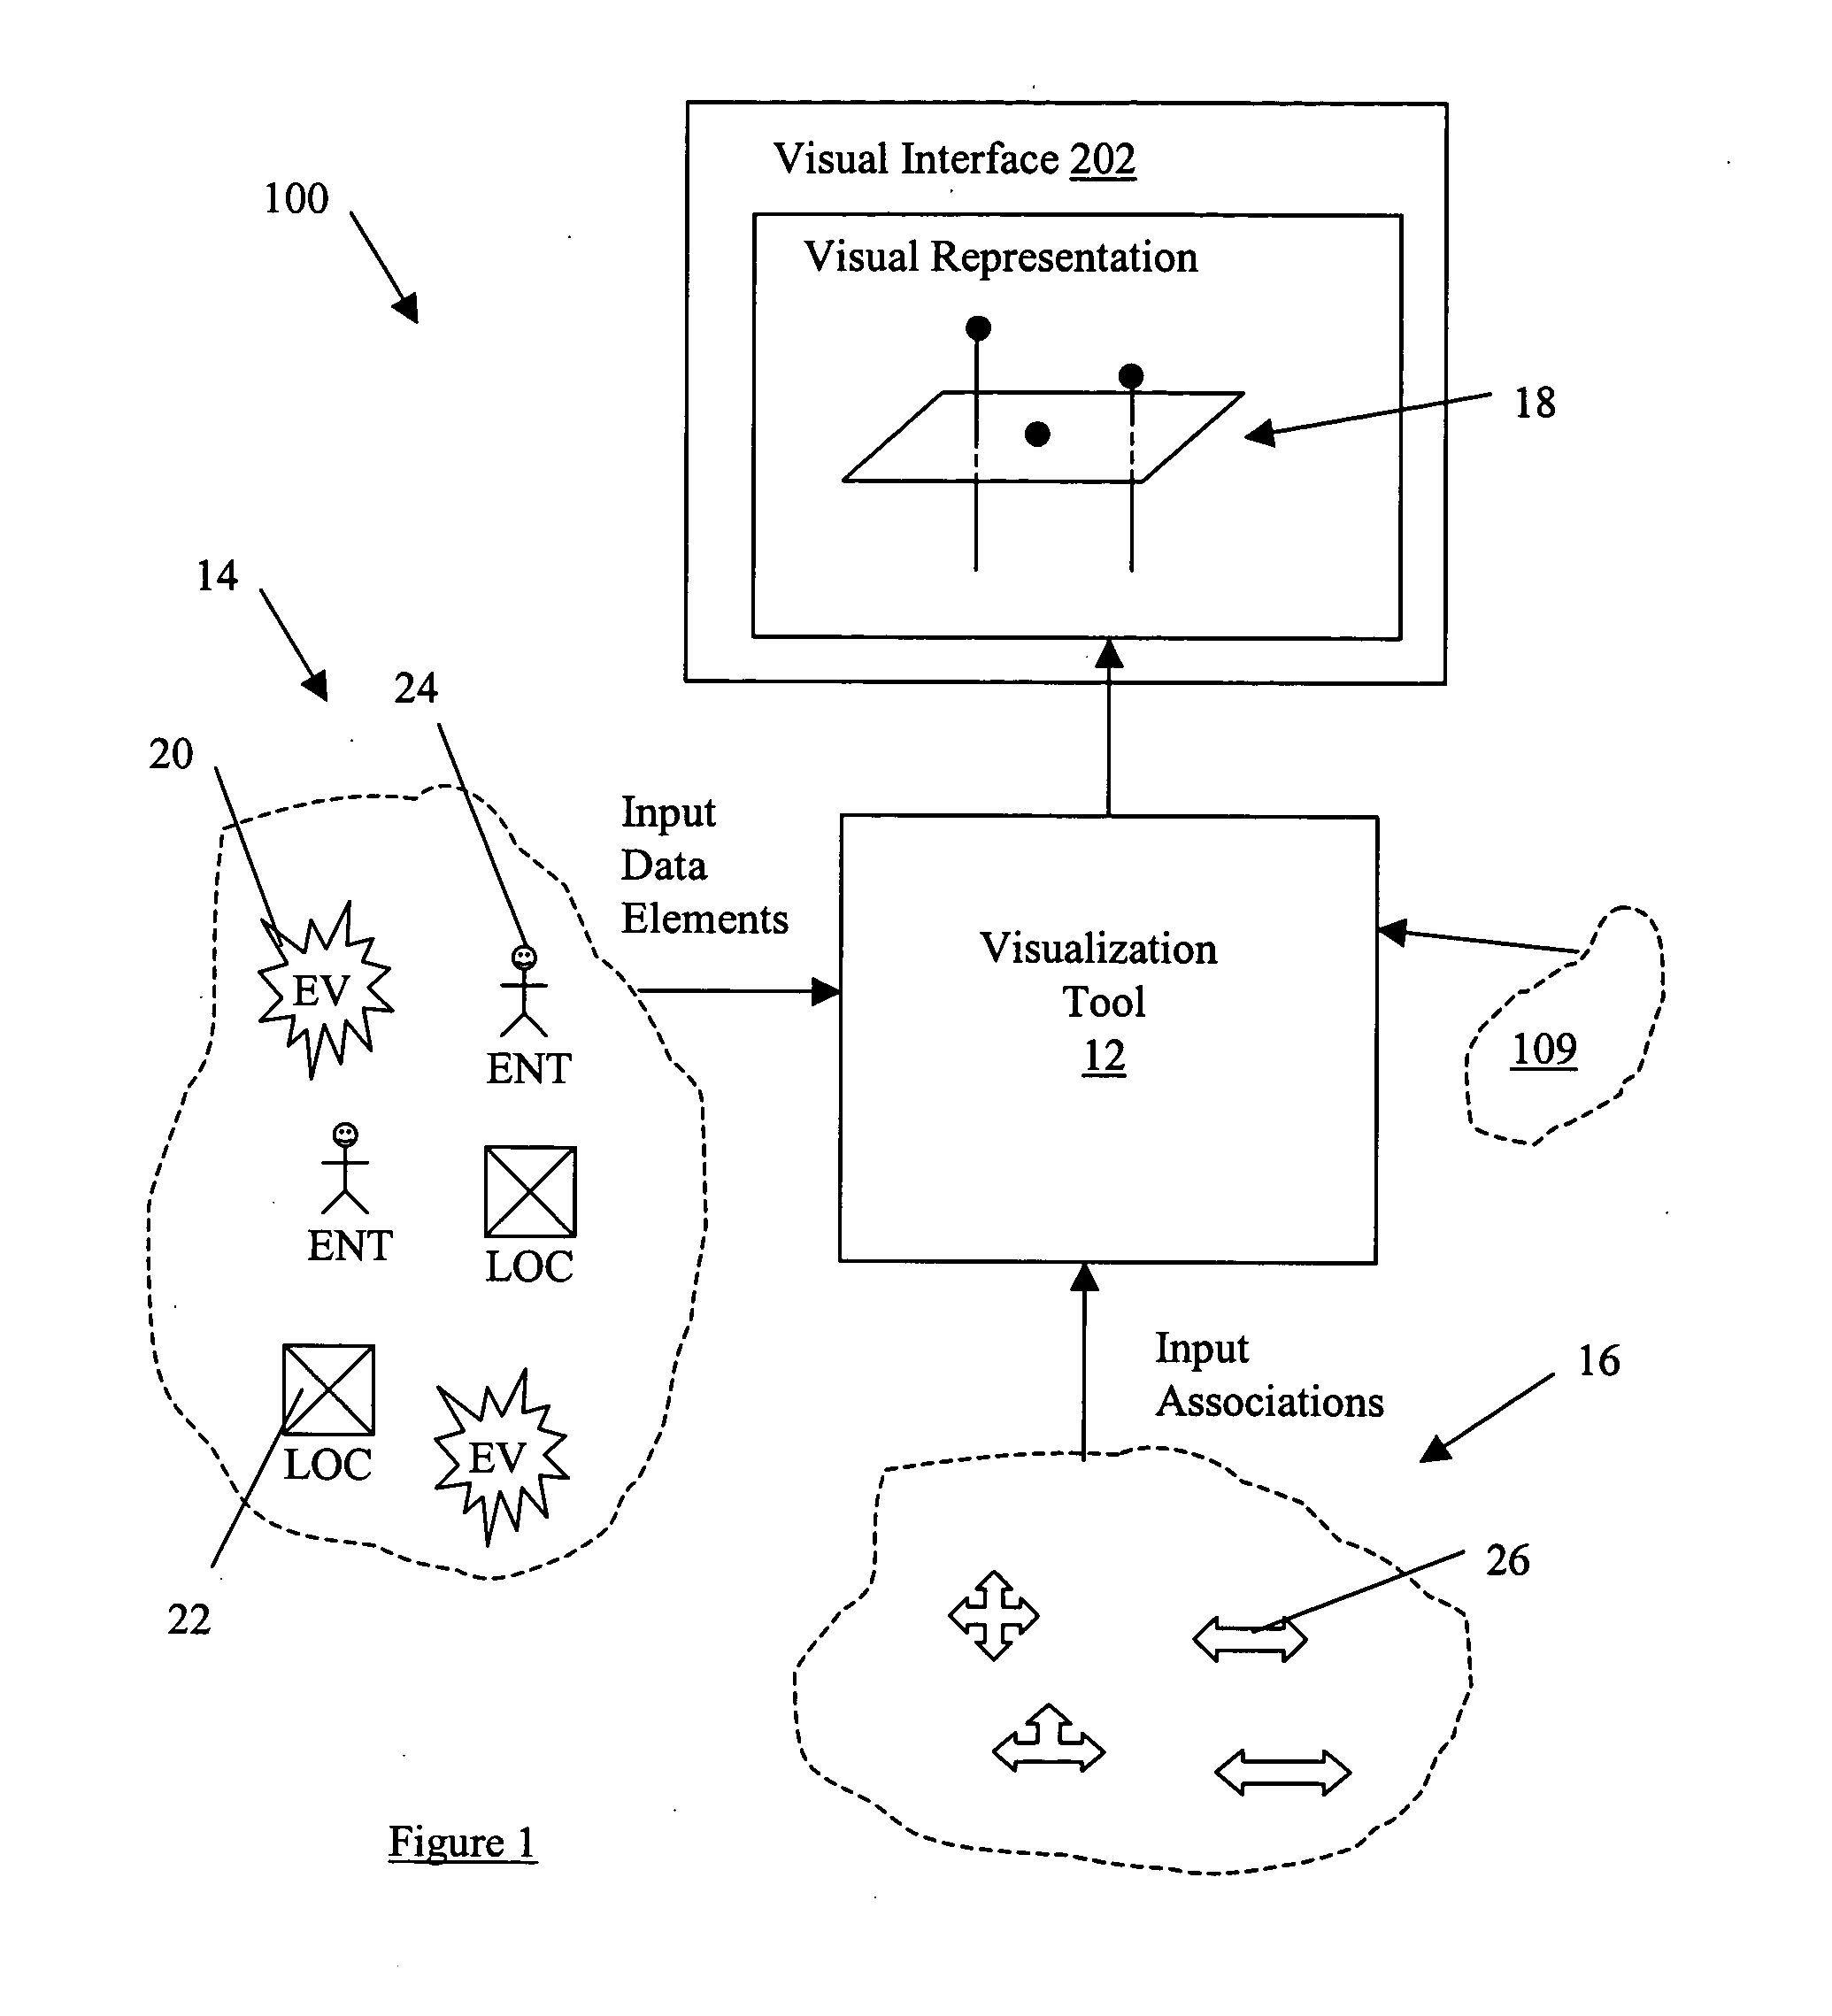 System and method for visualizing connected temporal and spatial information as an integrated visual representation on a user interface